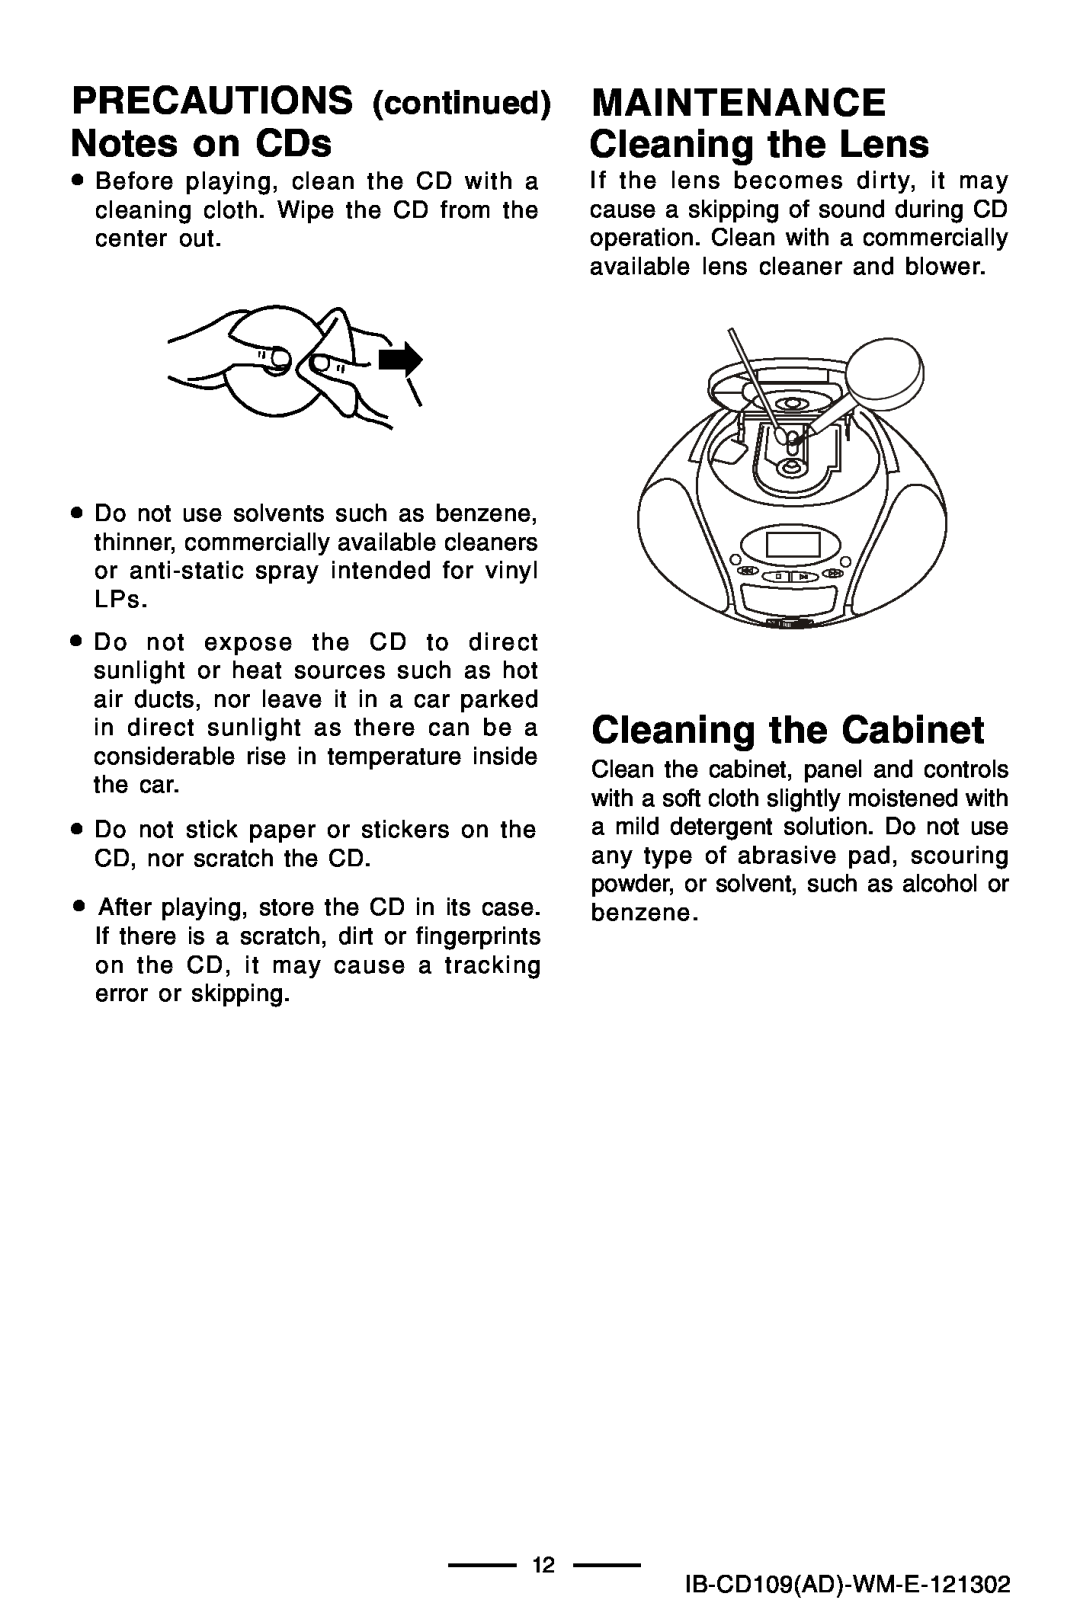 Lenoxx Electronics CD109 manual PRECAUTIONS continued Notes on CDs, MAINTENANCE Cleaning the Lens, Cleaning the Cabinet 